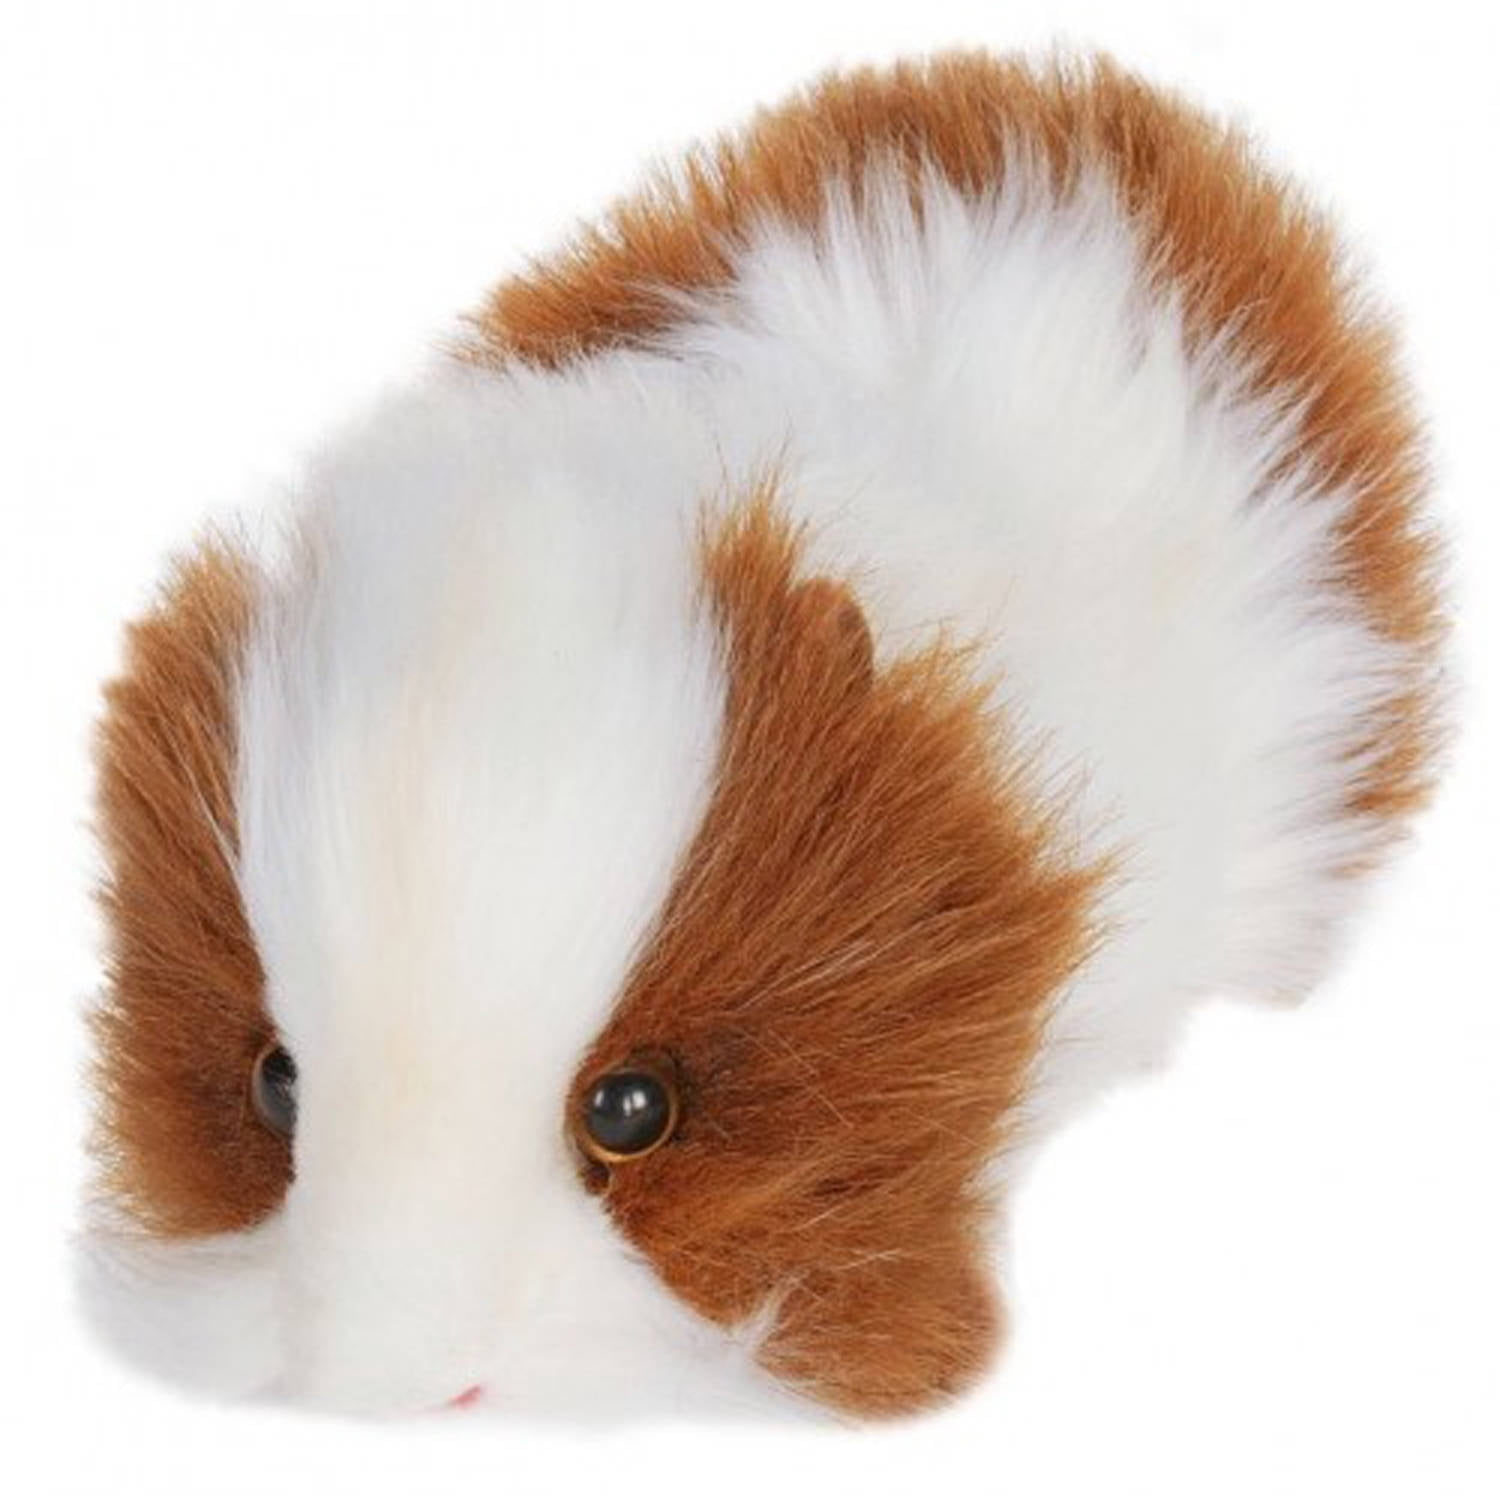 Gigi the Guinea Pig7 Inch Stuffed Animal PlushBy Tiger Tale Toys 